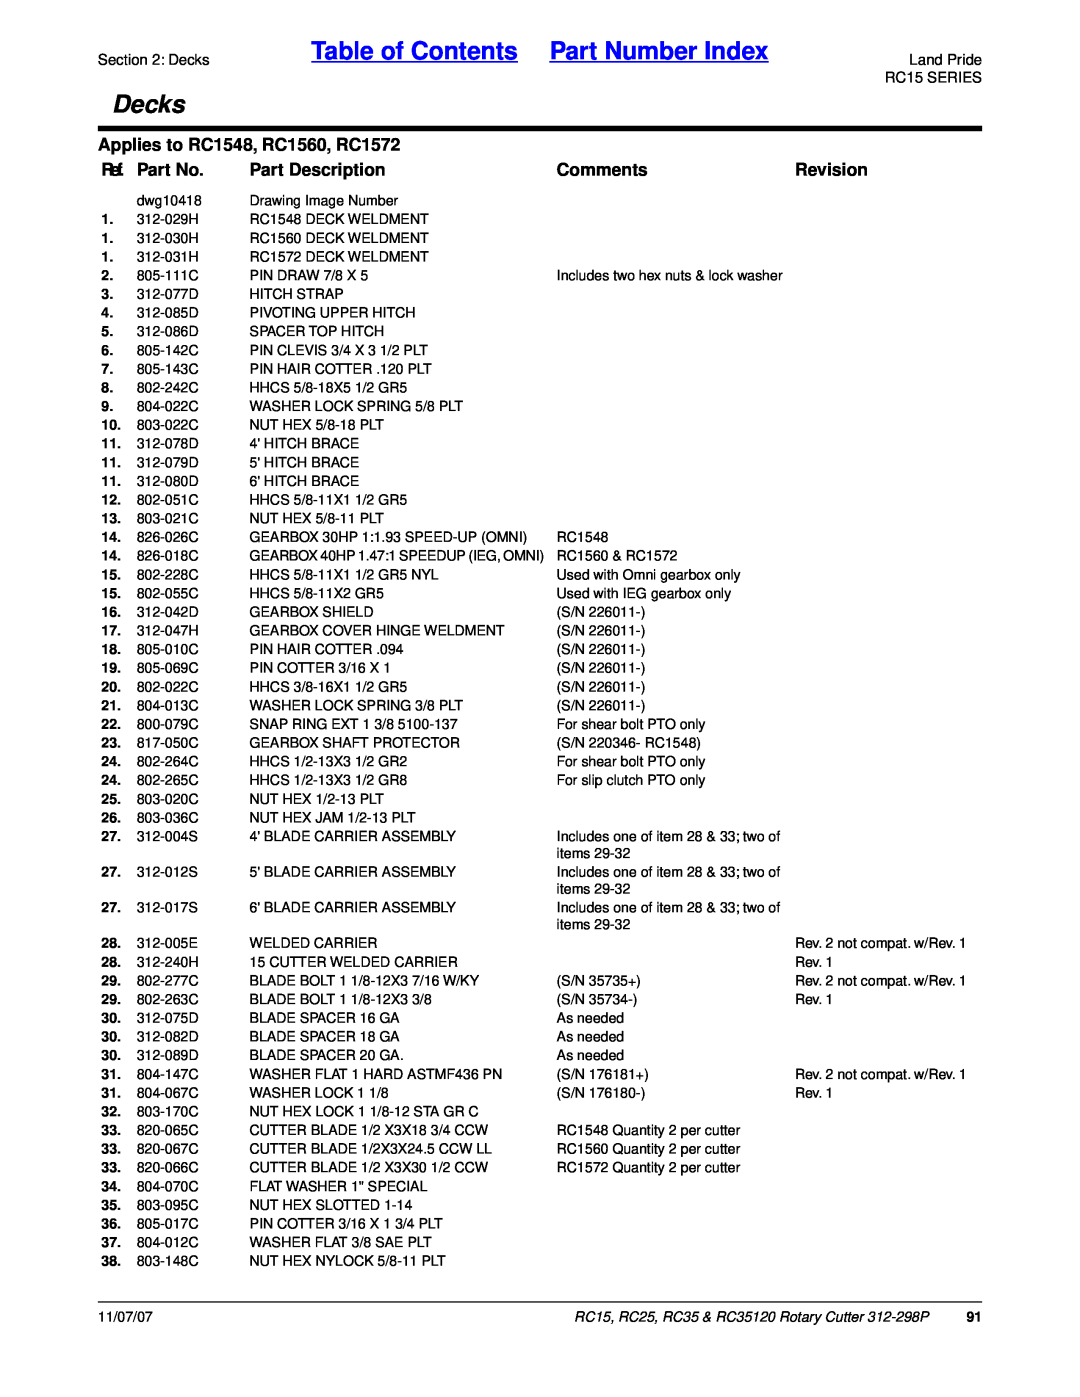 Land Pride RC35 Table of Contents Part Number Index, Decks, Applies to RC1548, RC1560, RC1572, Ref. Part No, Comments 